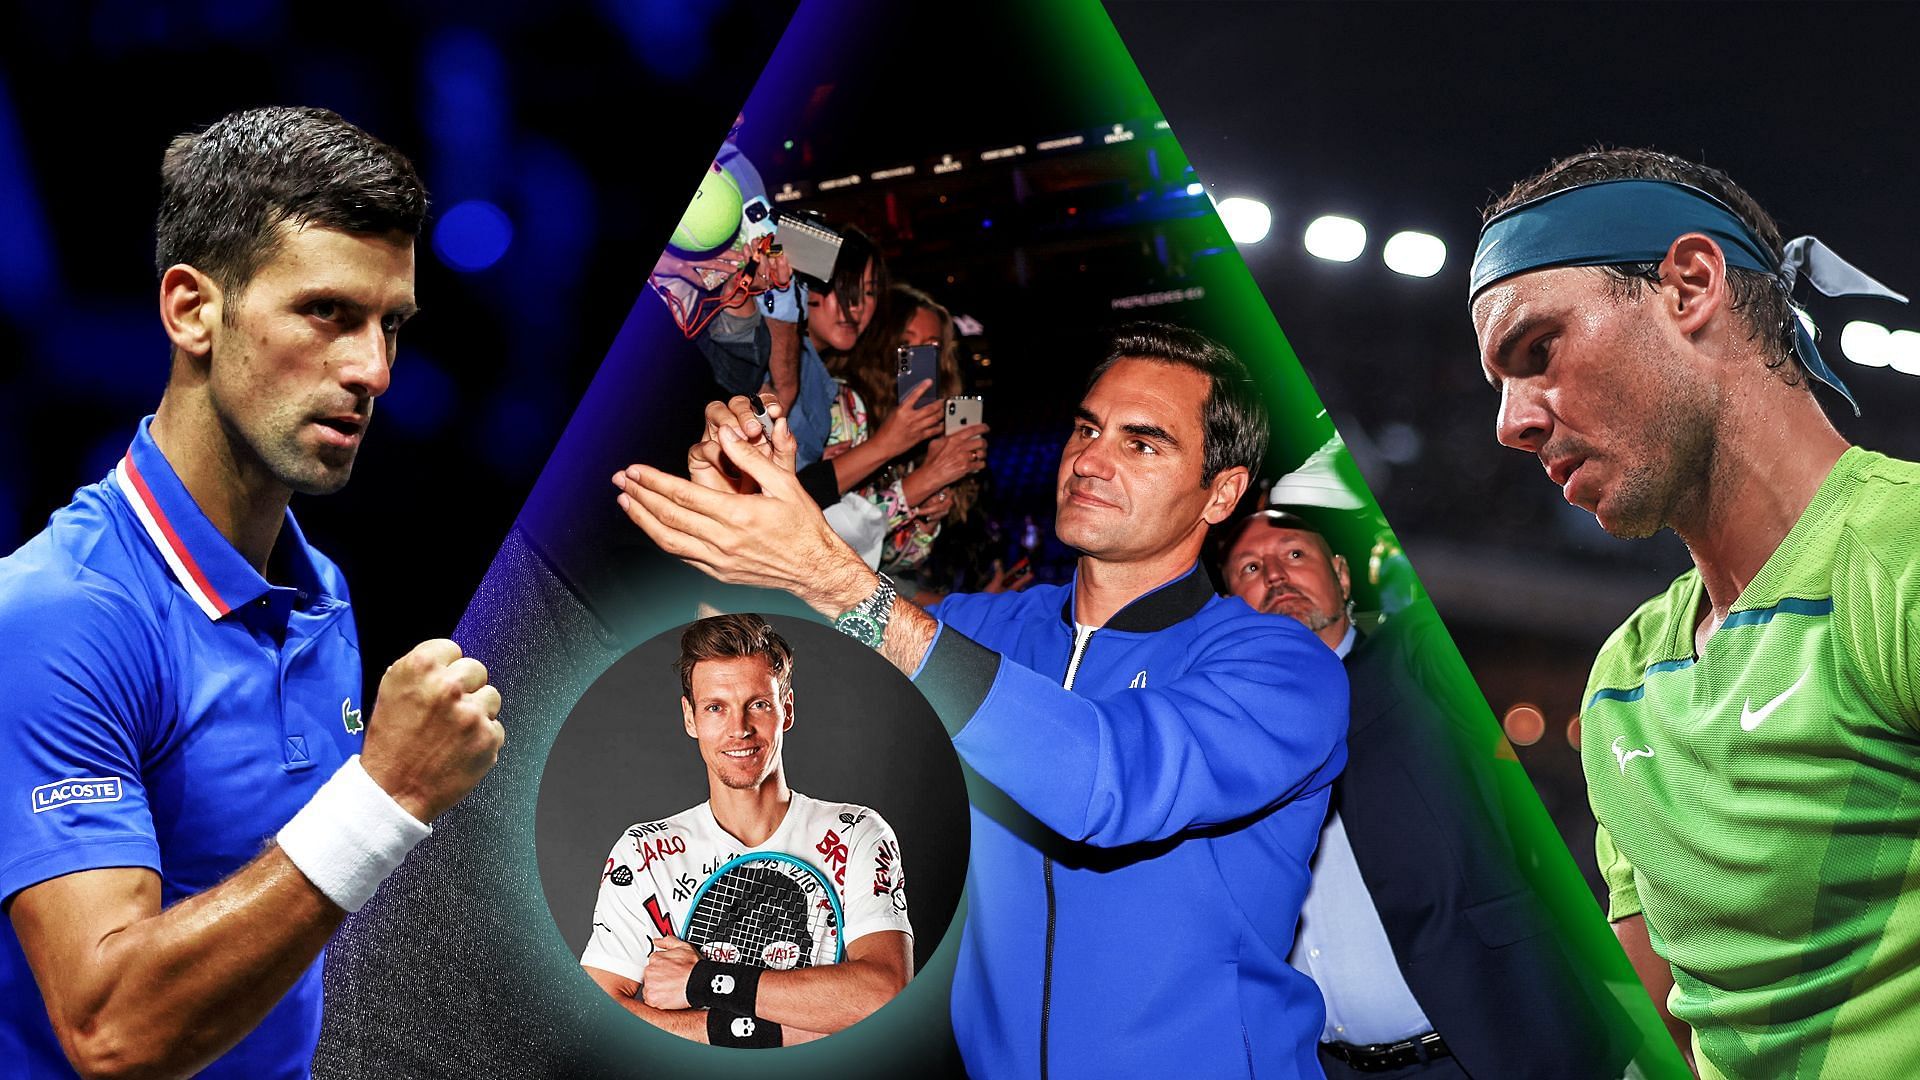 Tomas Berdych speak about Federer and compares his legacy with Nadal and Djokovic